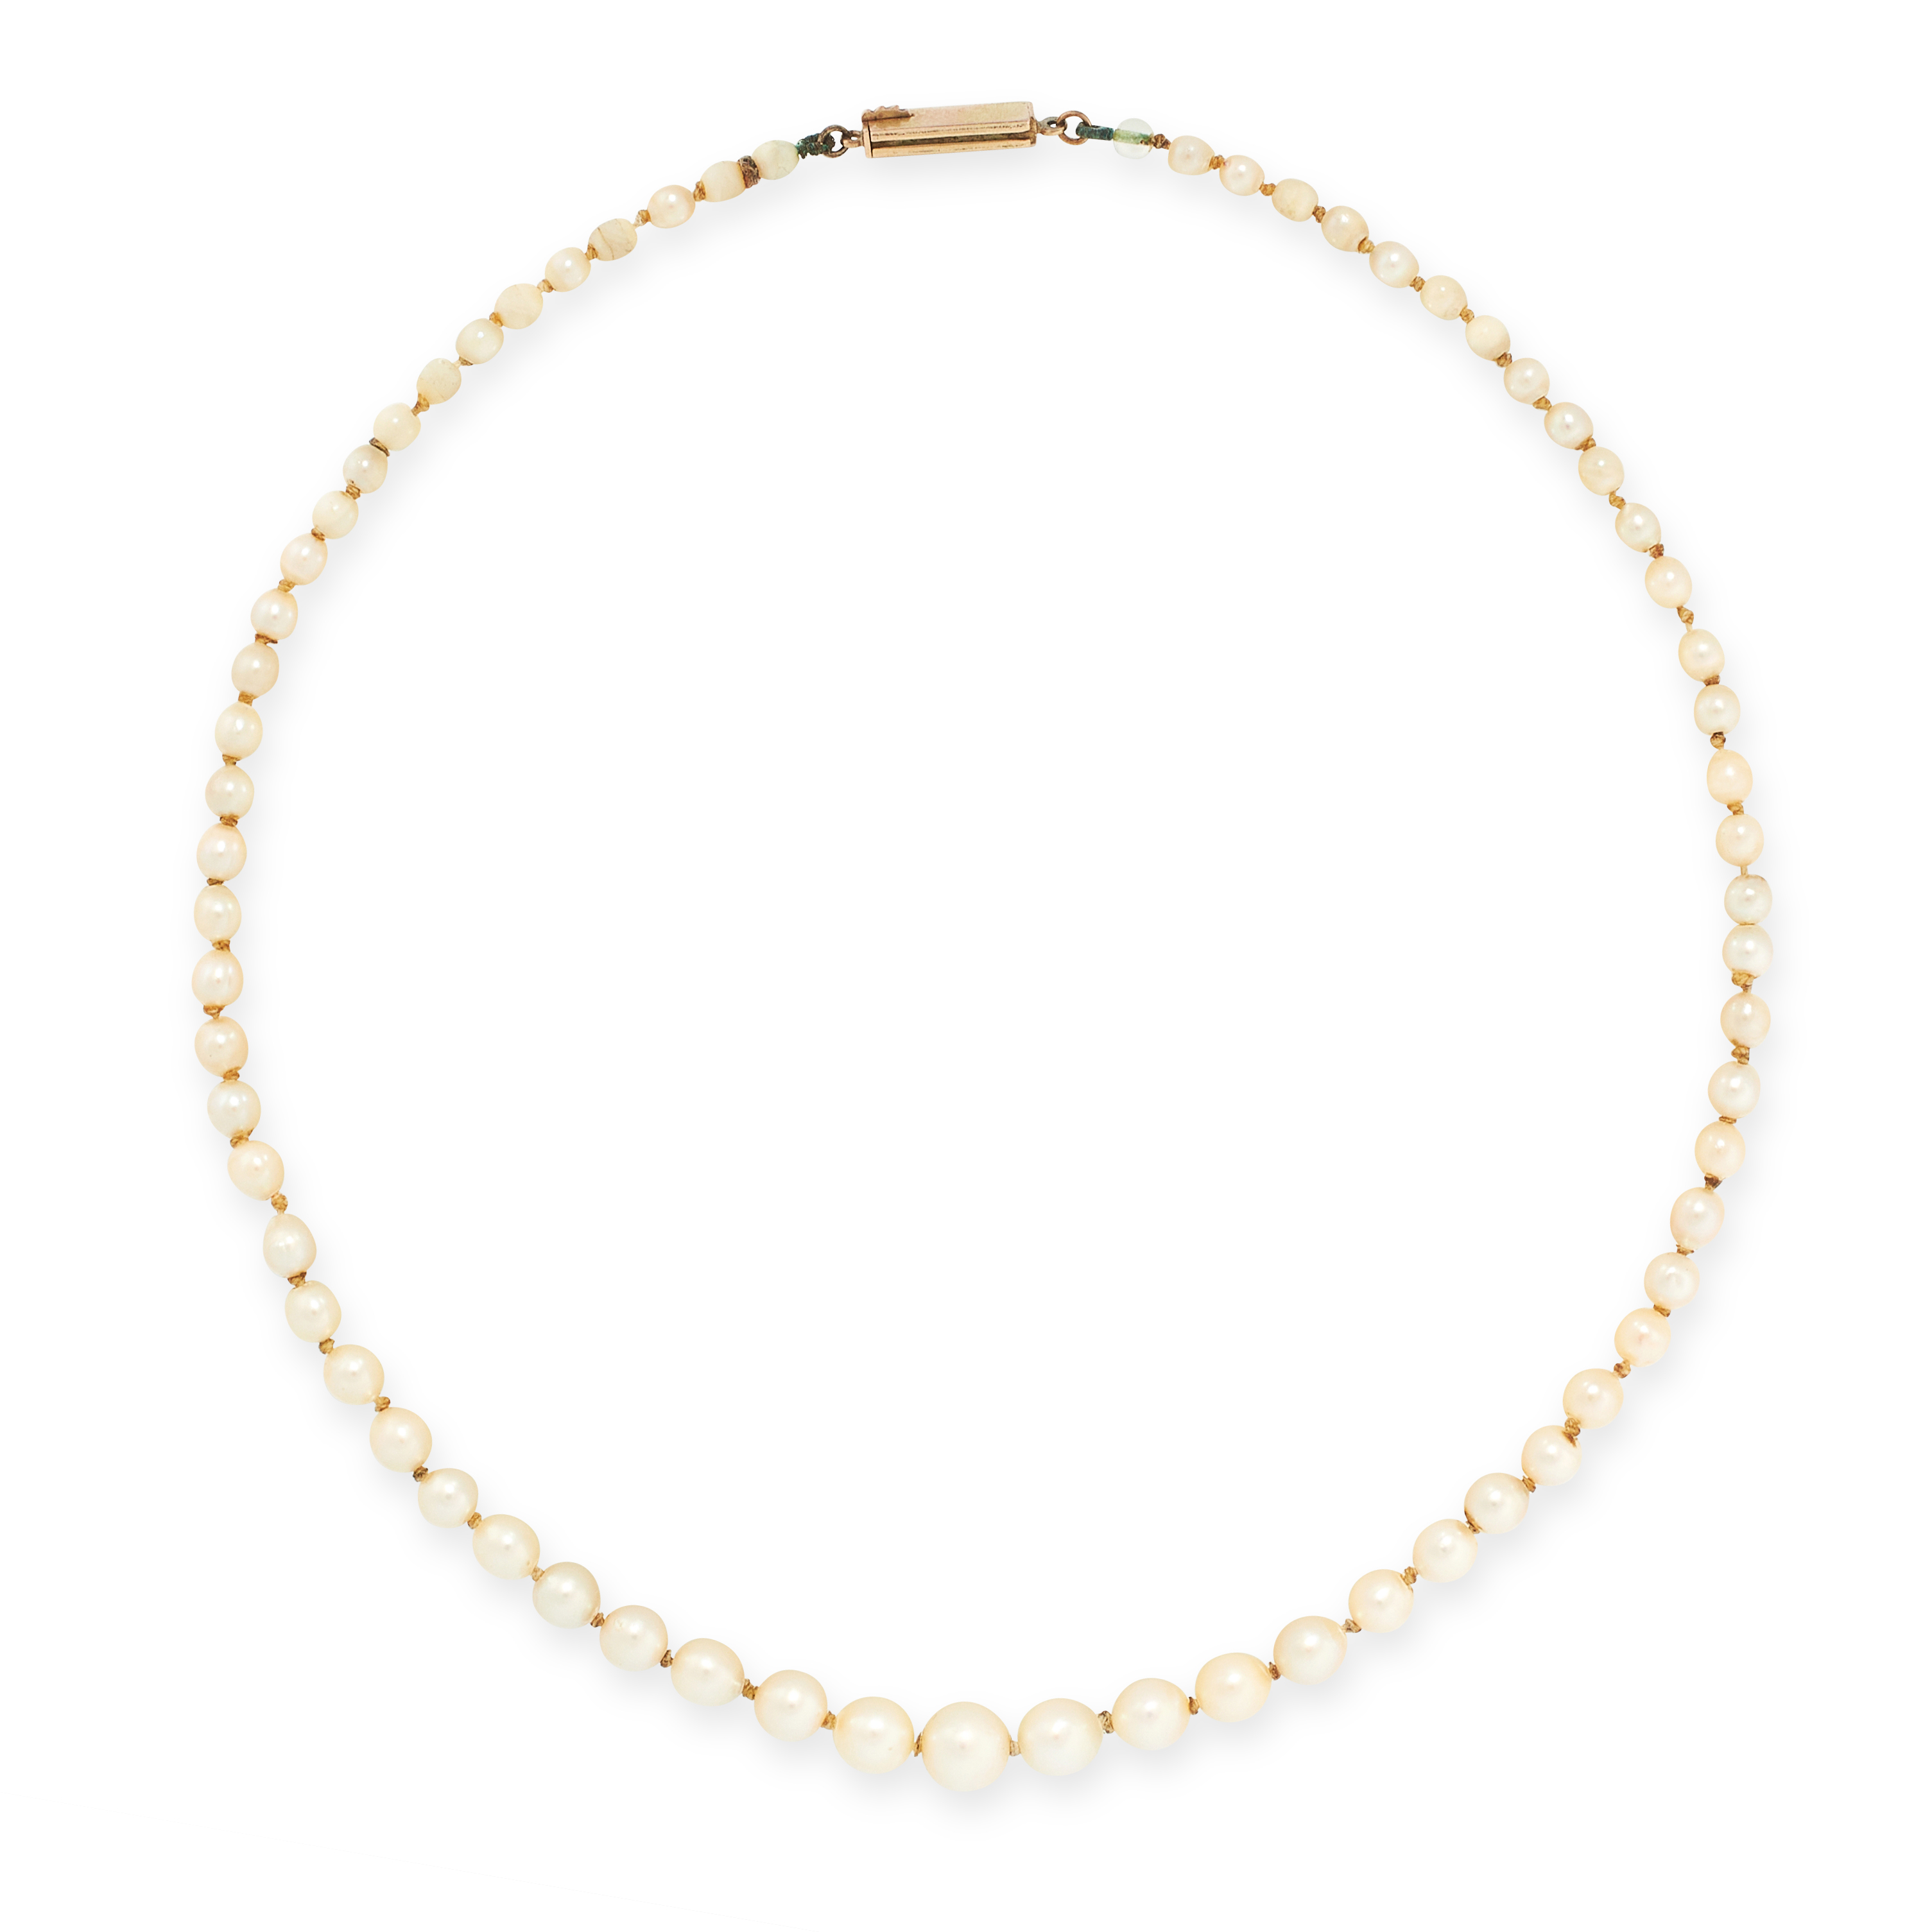 A PEARL NECKLACE in yellow gold, comprising a single row of sixty-seven graduated pearls ranging 7.